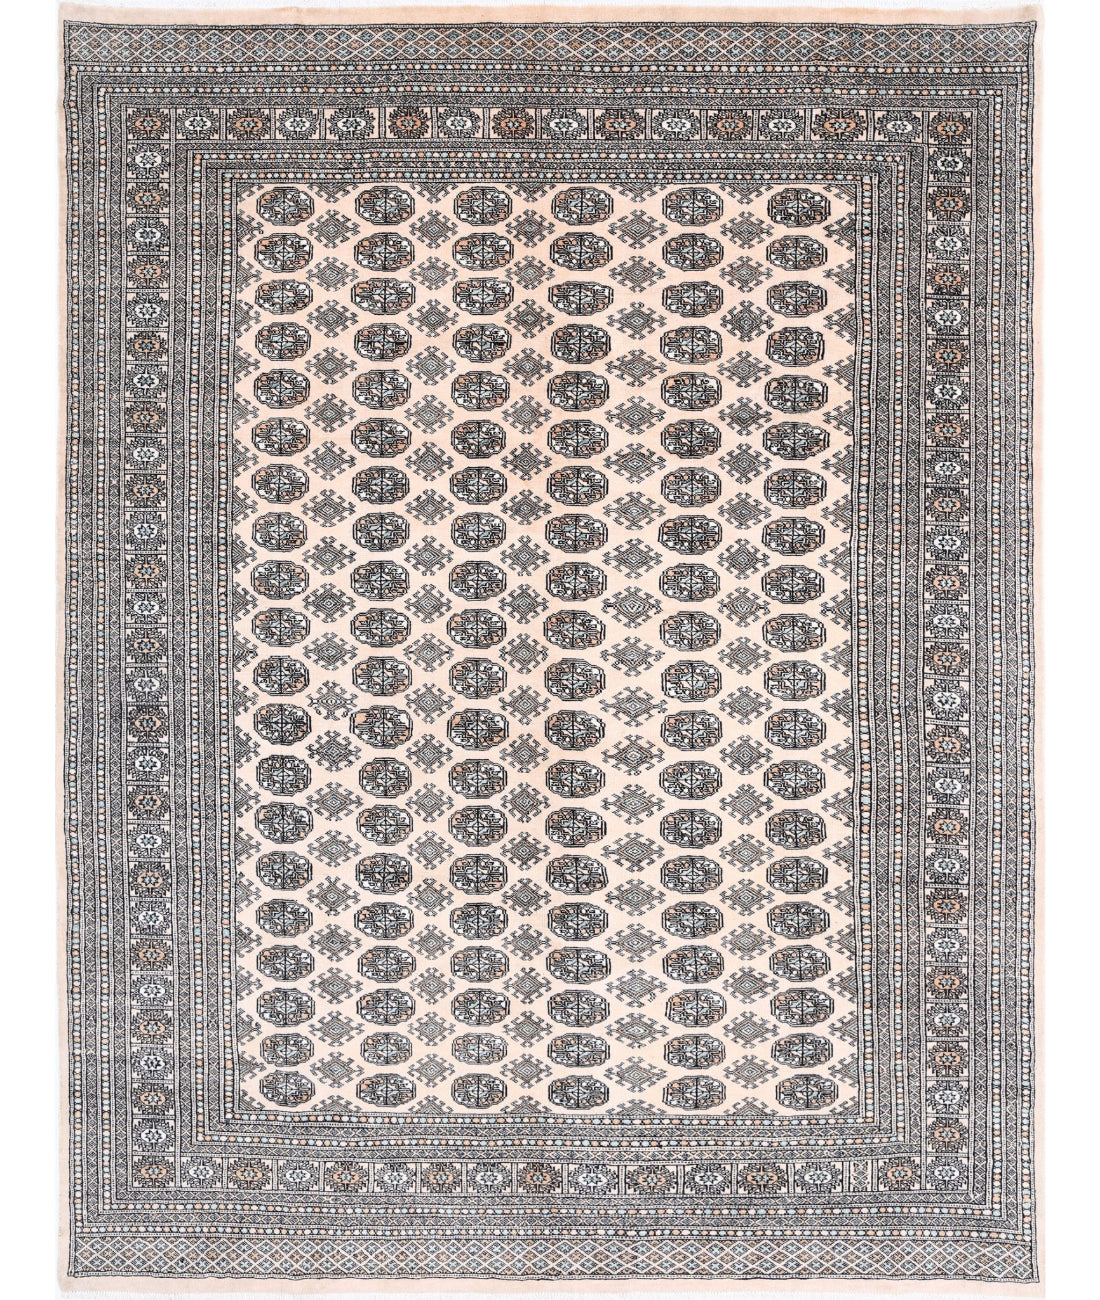 Hand Knotted Tribal Bokhara Wool Rug - 7'10'' x 10'2'' 7'10'' x 10'2'' (235 X 305) / Ivory / Taupe